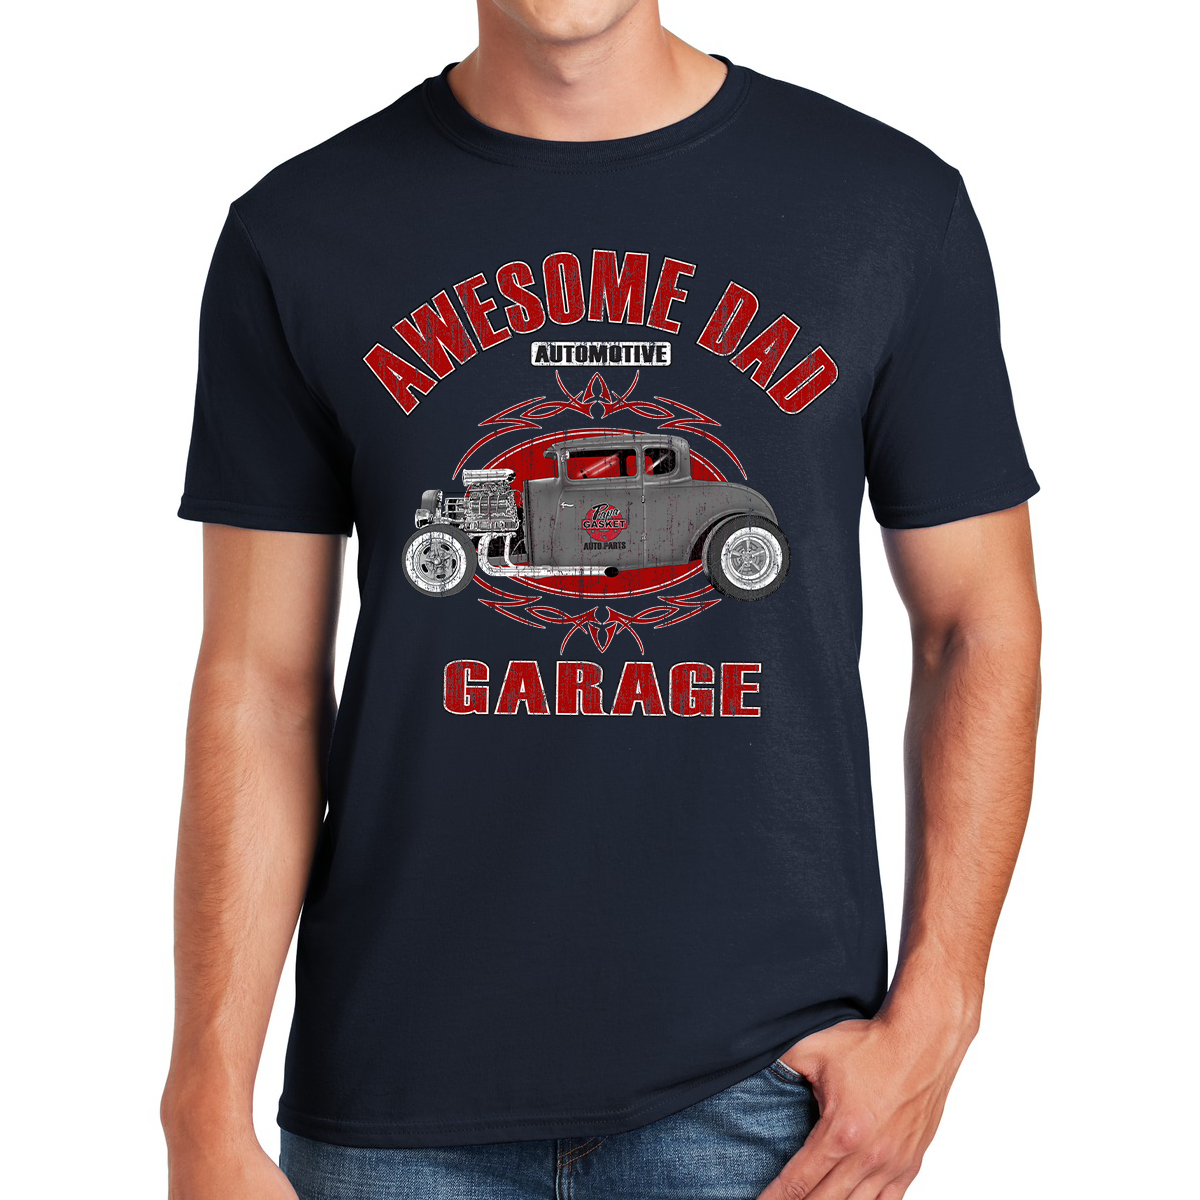 Awesome Dad Hot Rod Garage Revving Up Fatherhood With Style Gift For Dads T-shirt